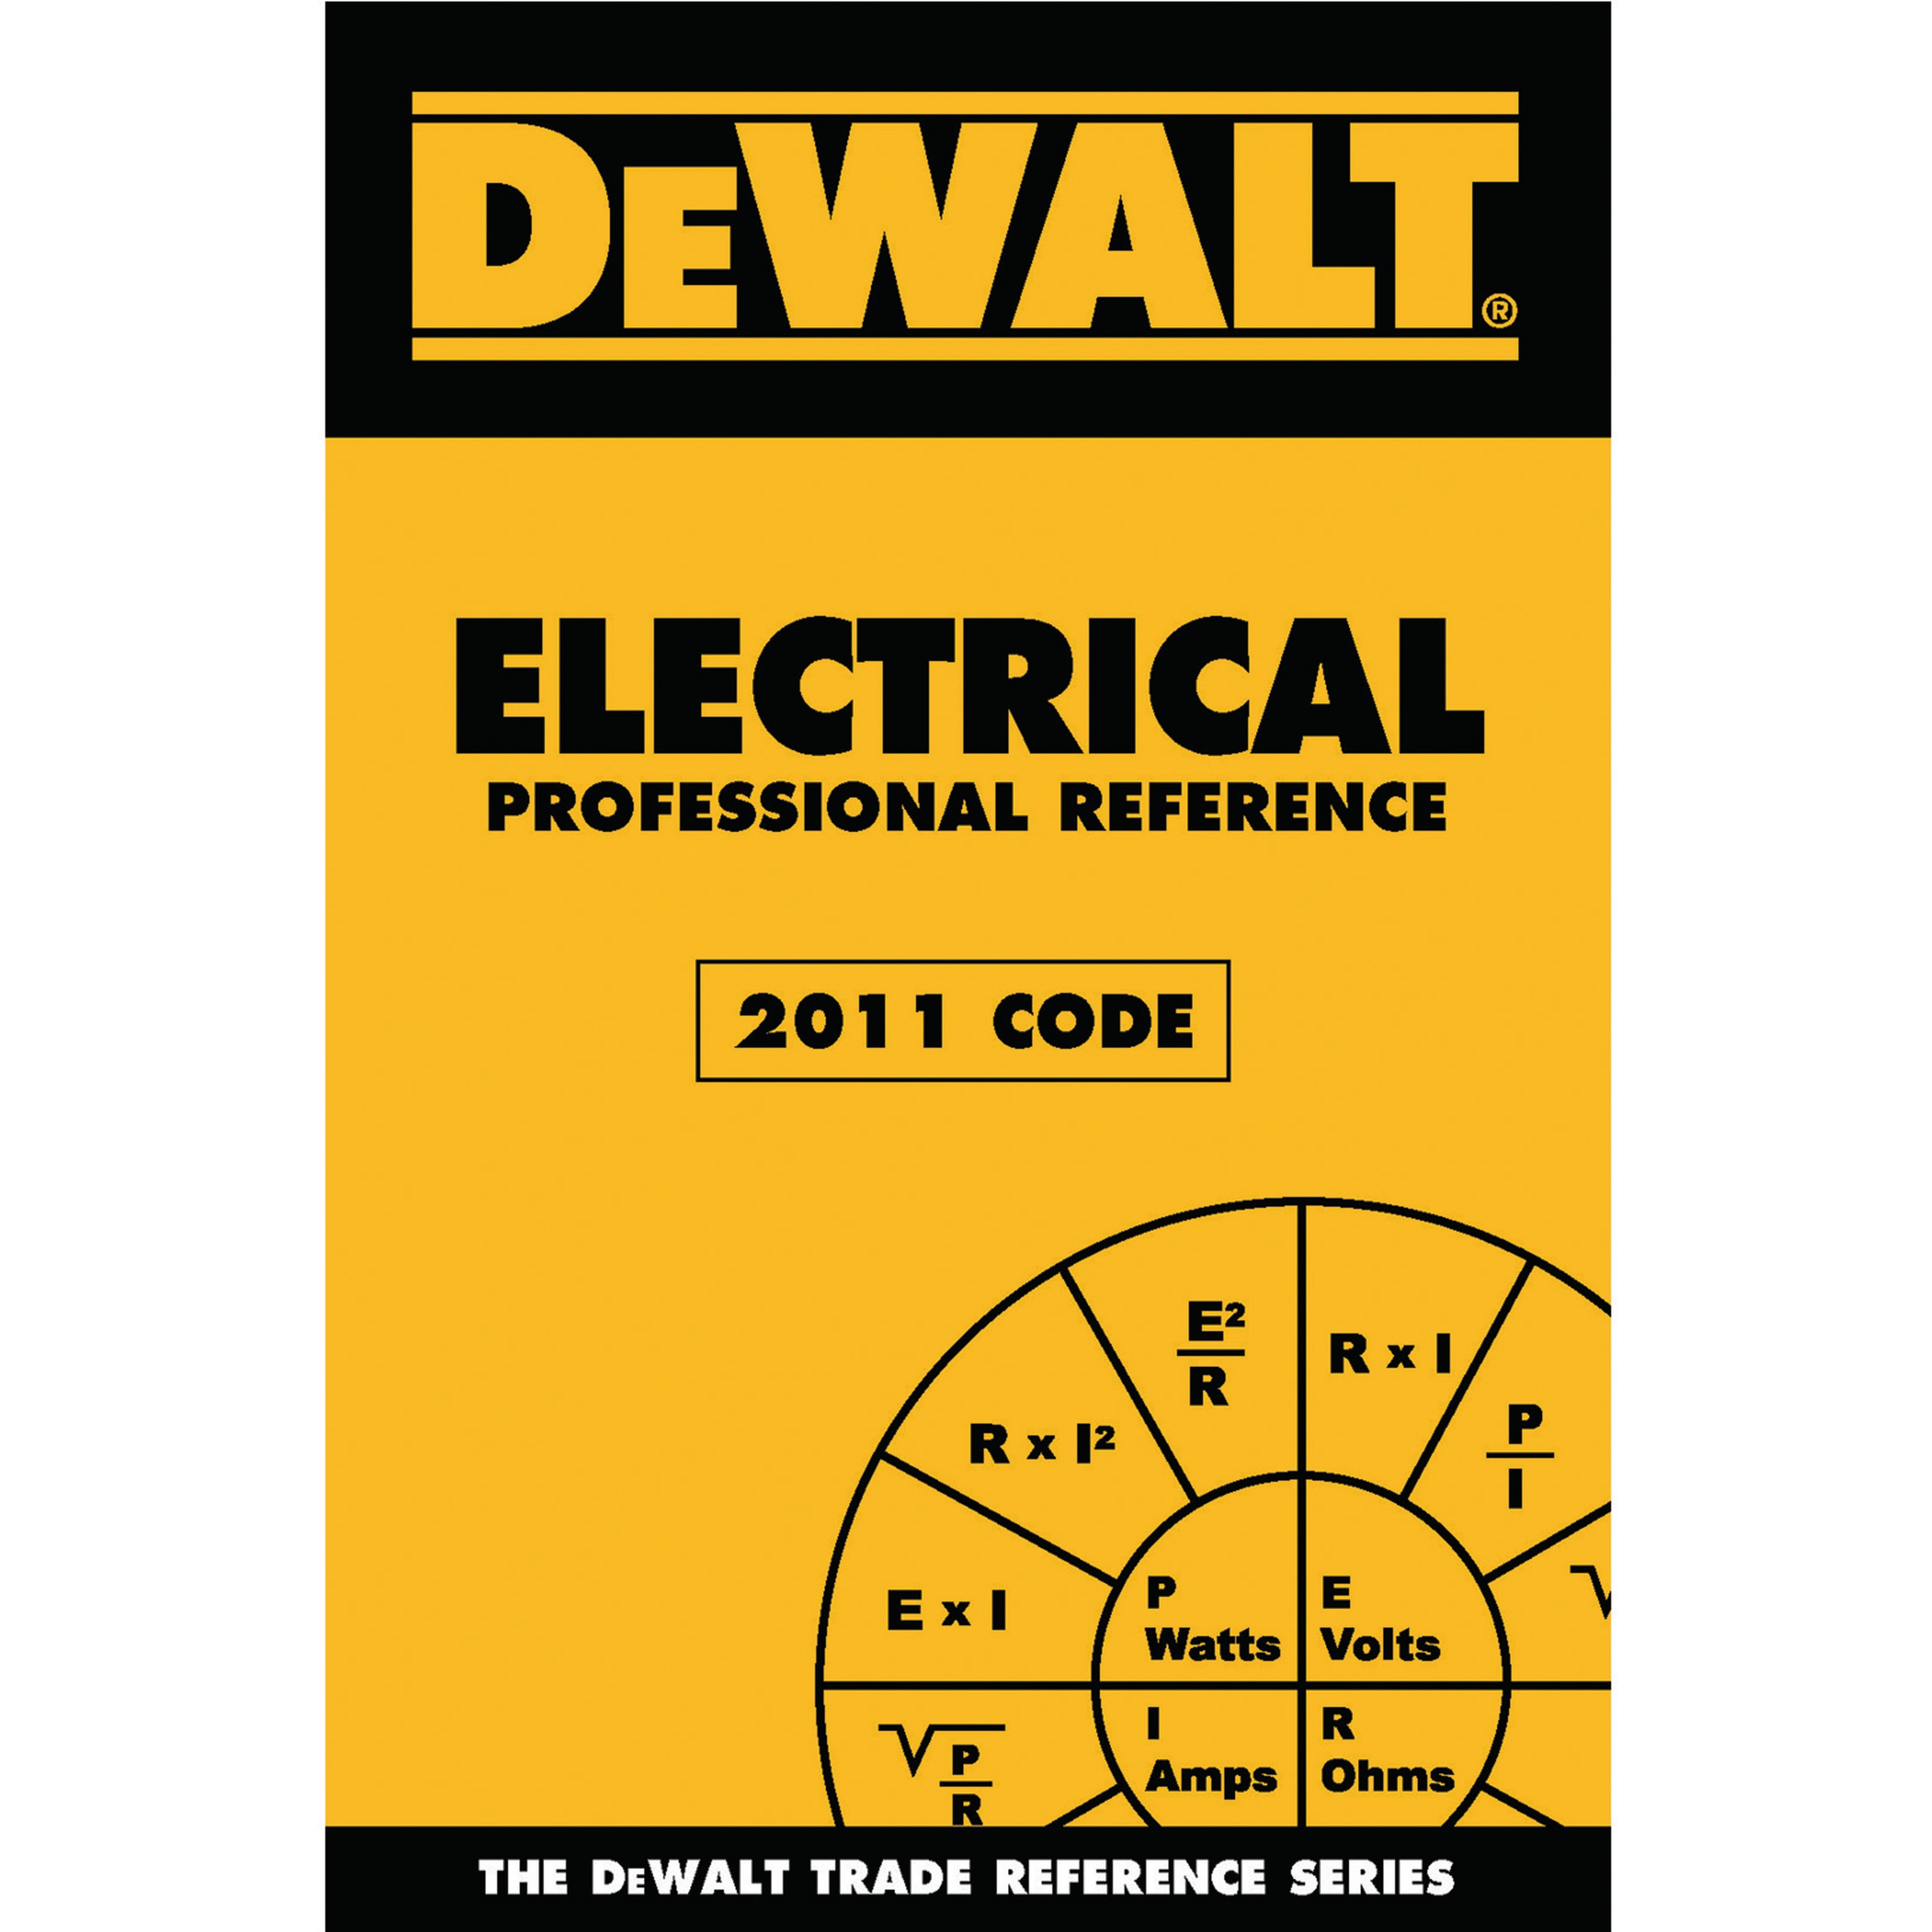 Electrical Professional Reference 2011 Edition.